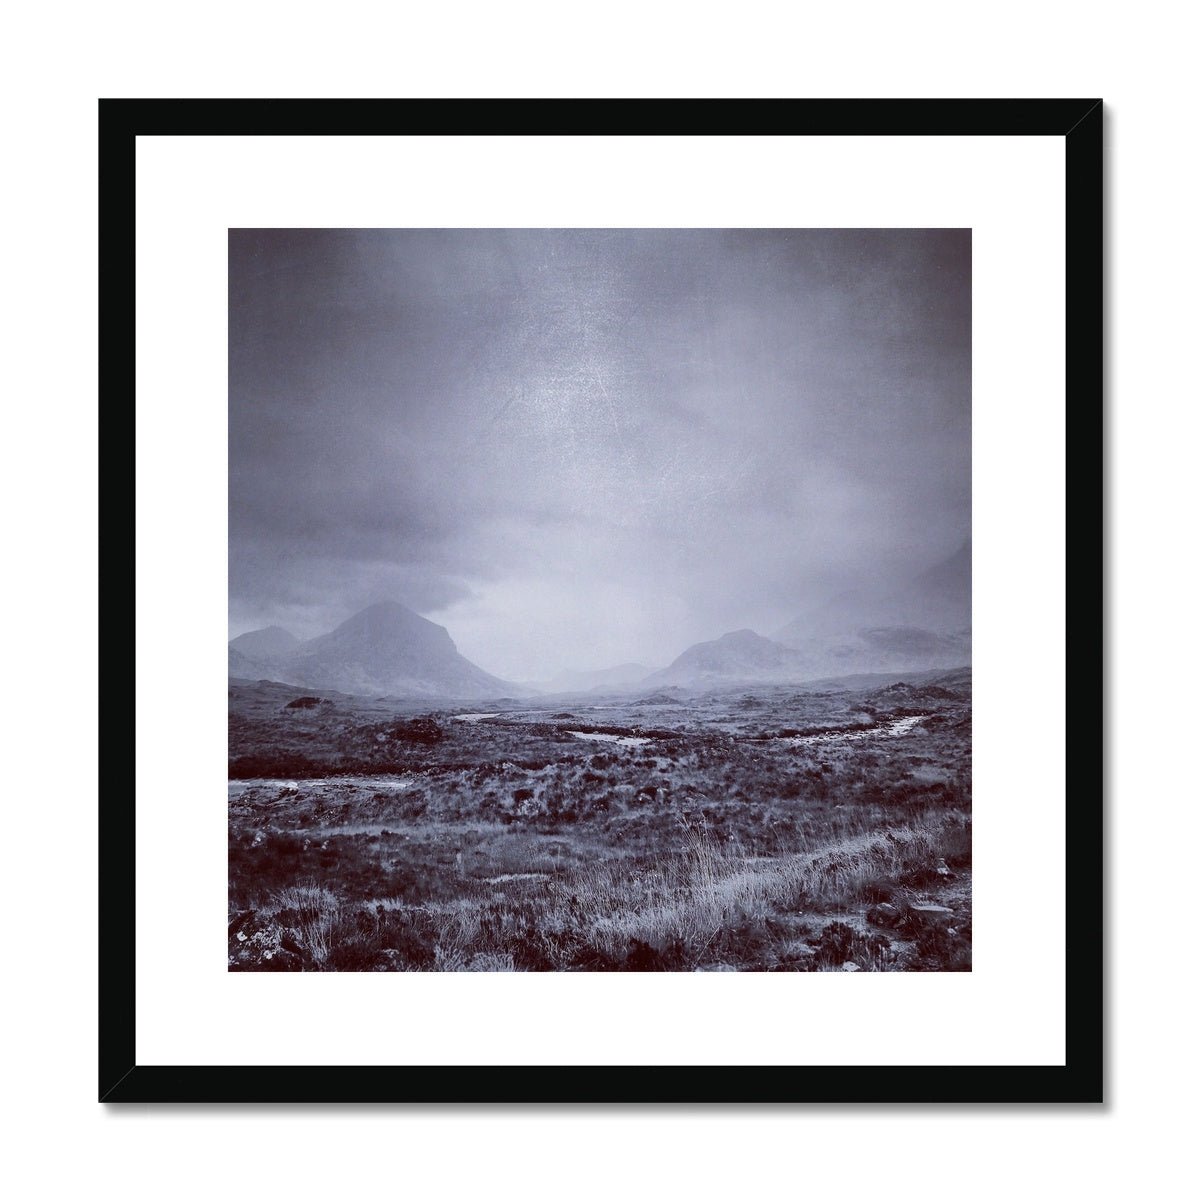 The Brooding Cuillin Skye Painting | Framed & Mounted Prints From Scotland-Framed & Mounted Prints-Skye Art Gallery-20"x20"-Black Frame-Paintings, Prints, Homeware, Art Gifts From Scotland By Scottish Artist Kevin Hunter